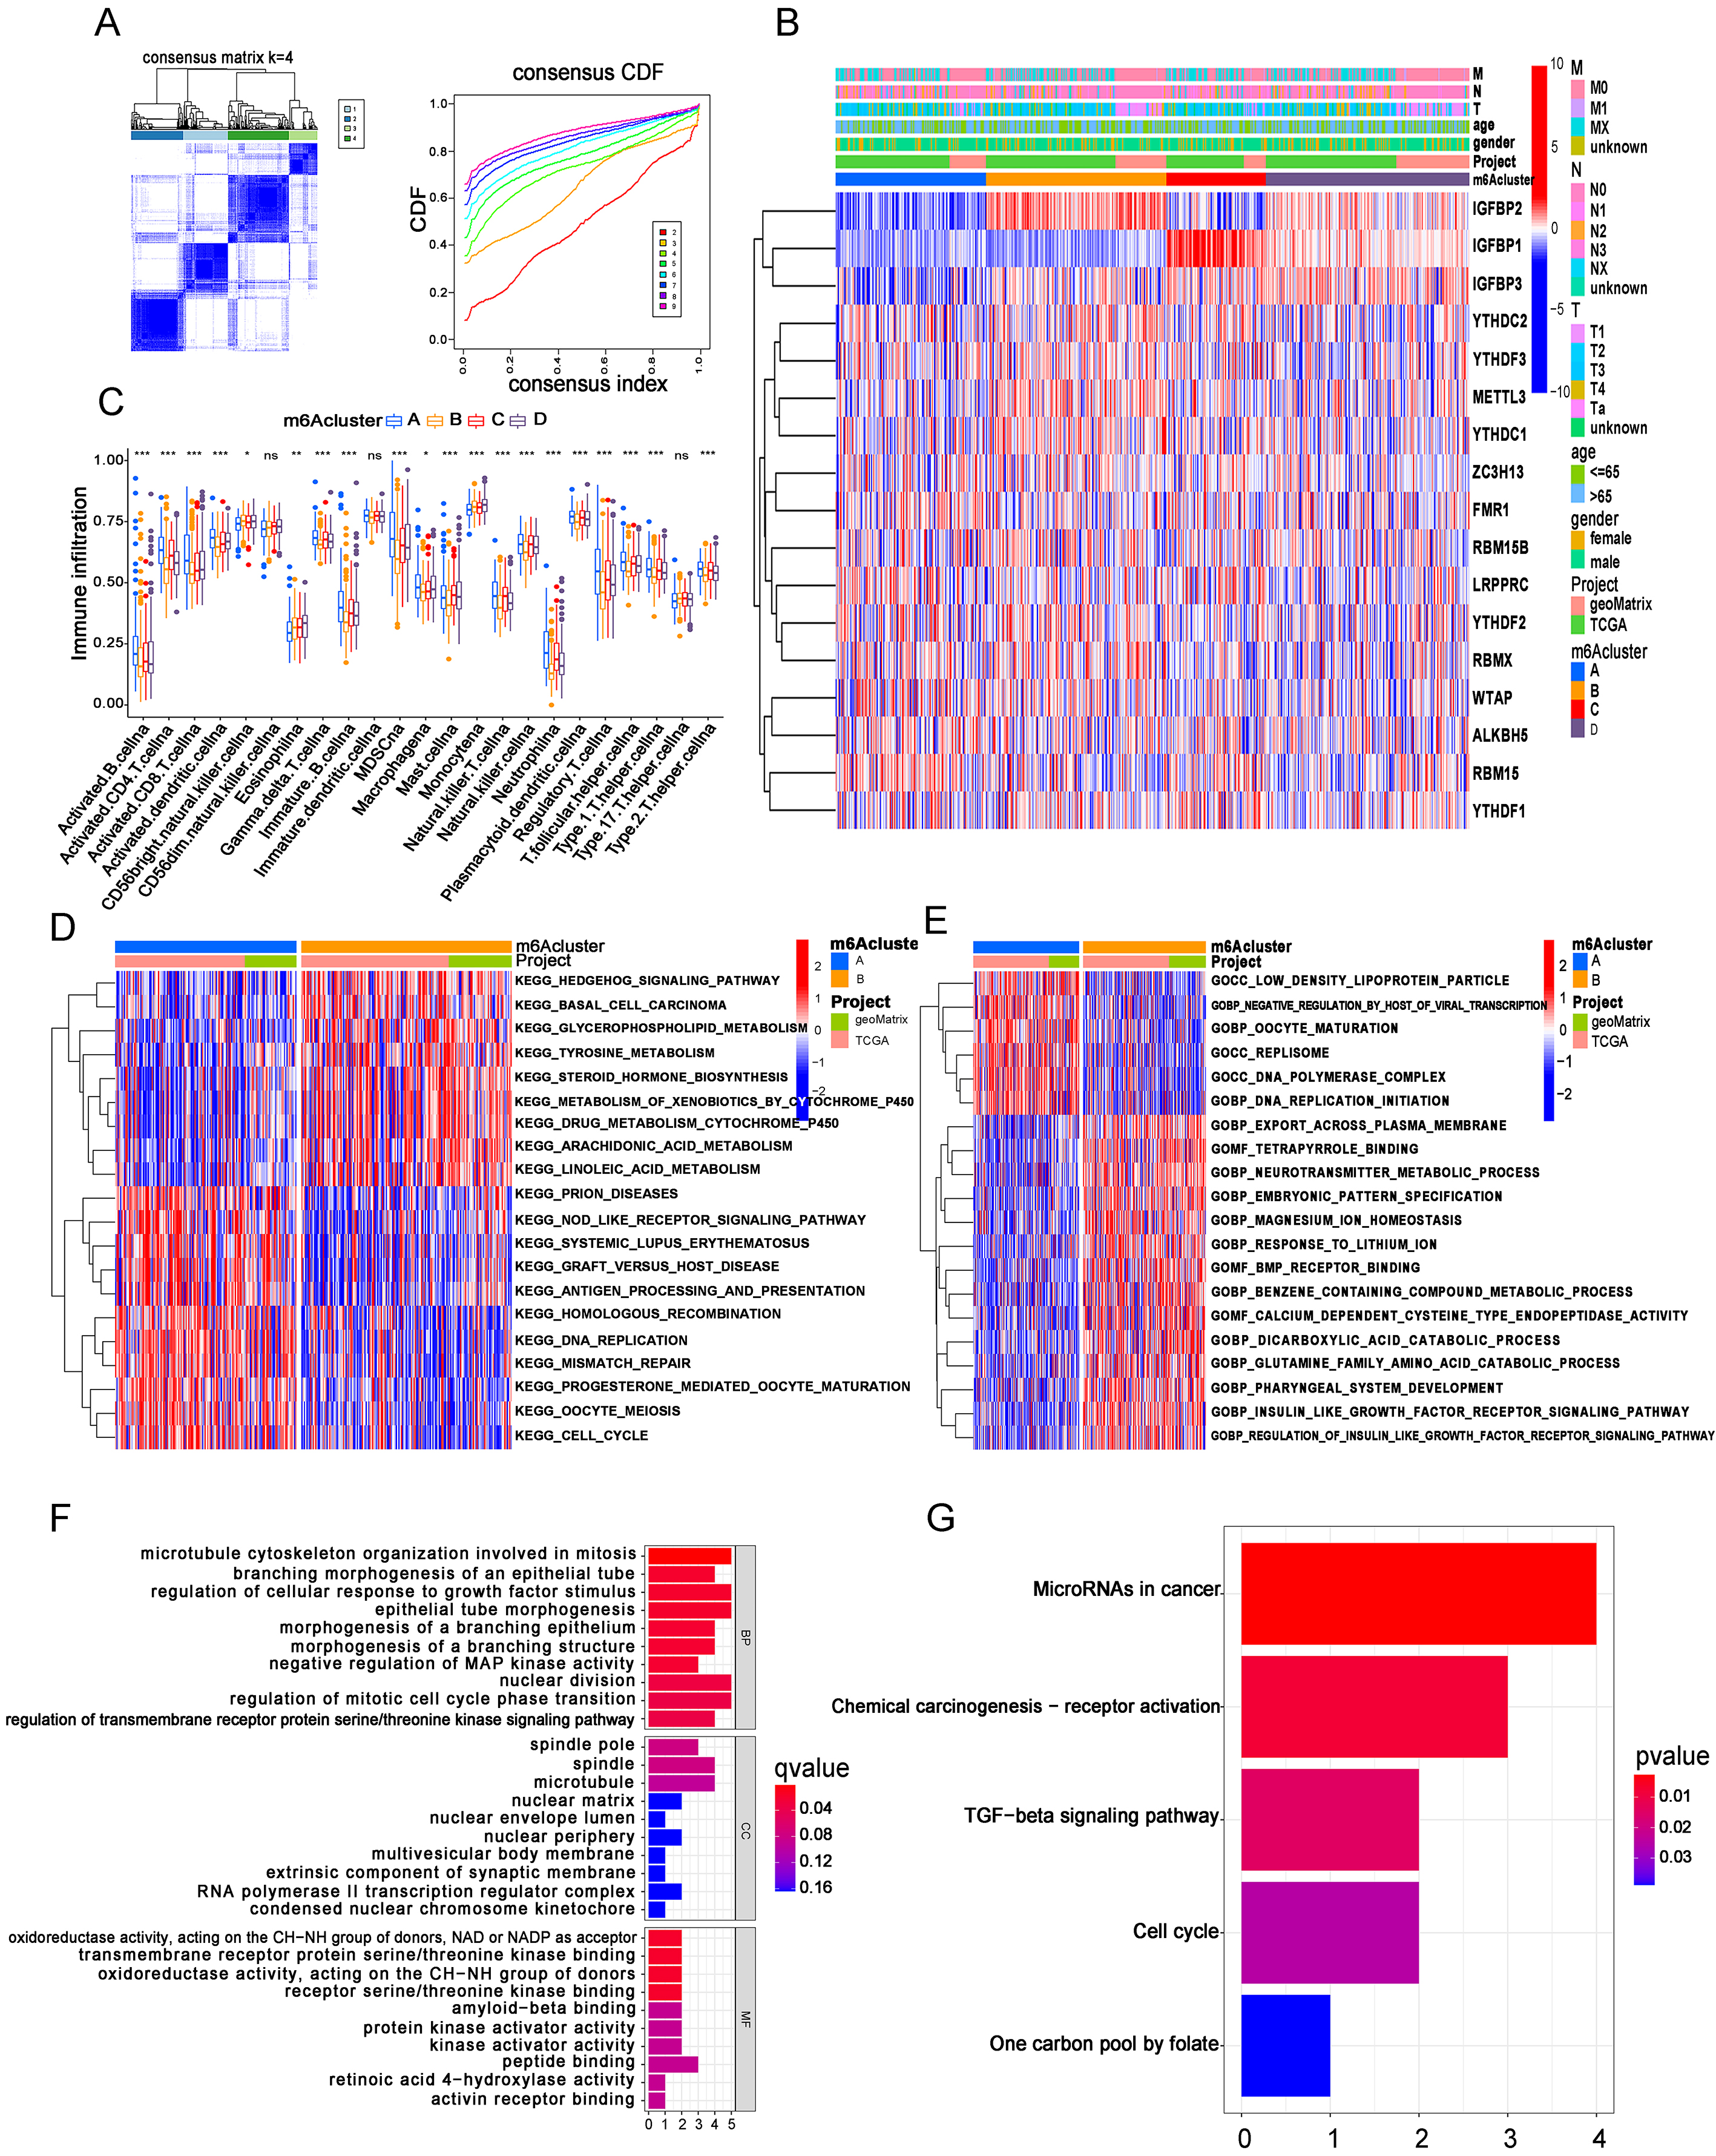 m6A clusters were identified based on MRGs in BC patients. (A) BC samples (n= 596) were divided into four m6A clusters based on the consensus clustering matrix (k= 4) in both TCGA and GEO cohorts. (B) Heatmap of the expression status of 17 m6A MRGs in m6A clusters. (C) The differences in 23 immune cell infiltration levels in m6A clusters. (D, E) KEGG and GO functional analysis between m6A clusters A and B. (F, G) The results of GO and KEGG enrichment analysis for the intersection of differentially expressed genes between m6A clusters.